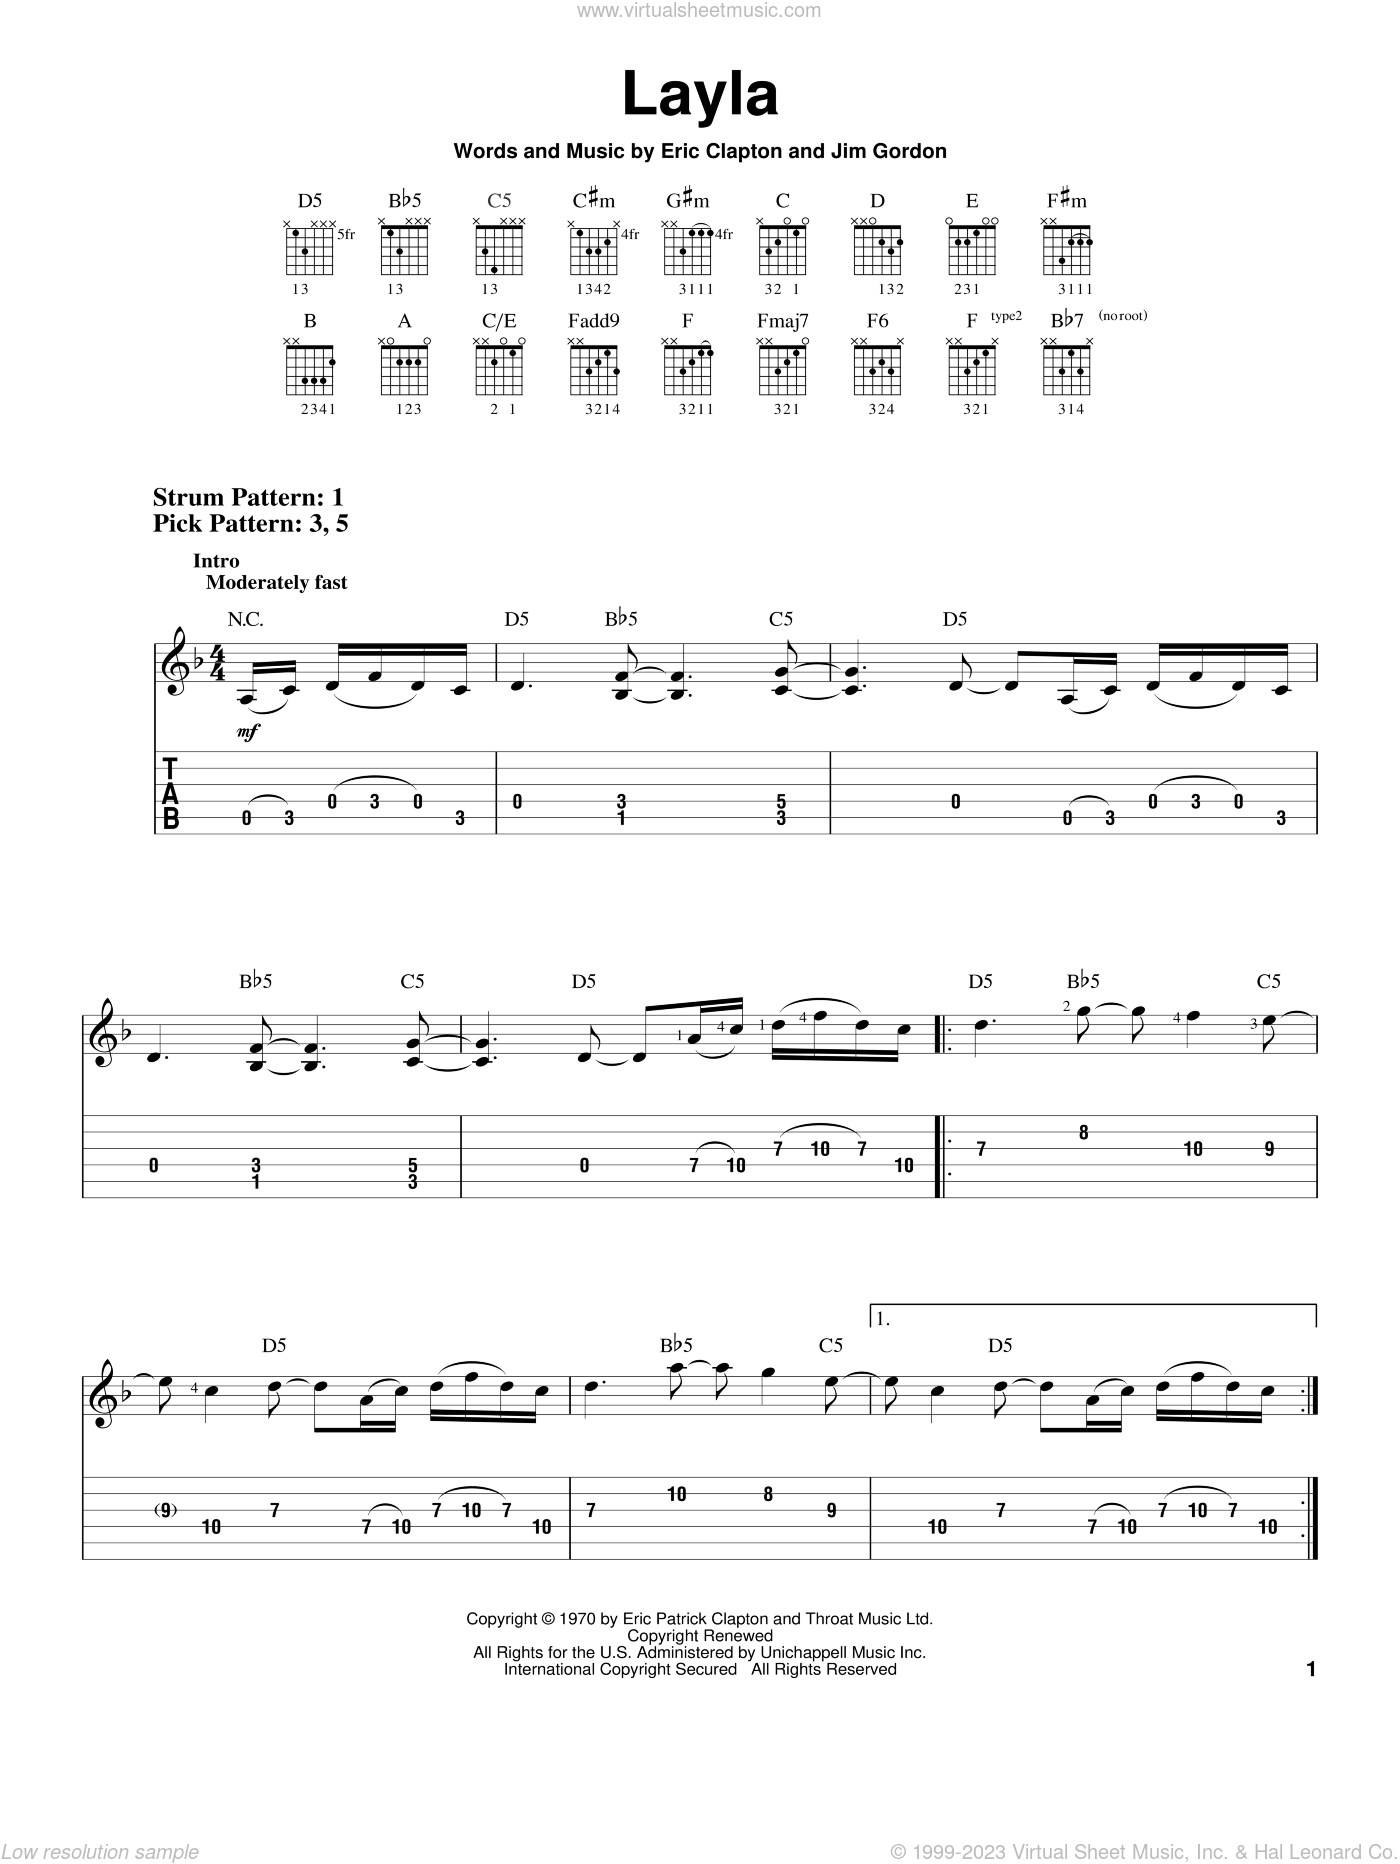 Guitar Music Sheets / Free guitar tab sheet music, Die Forelle : Unlike guitar sheet music, guitar tab music provides a visualization of where to place your fingers as you play.